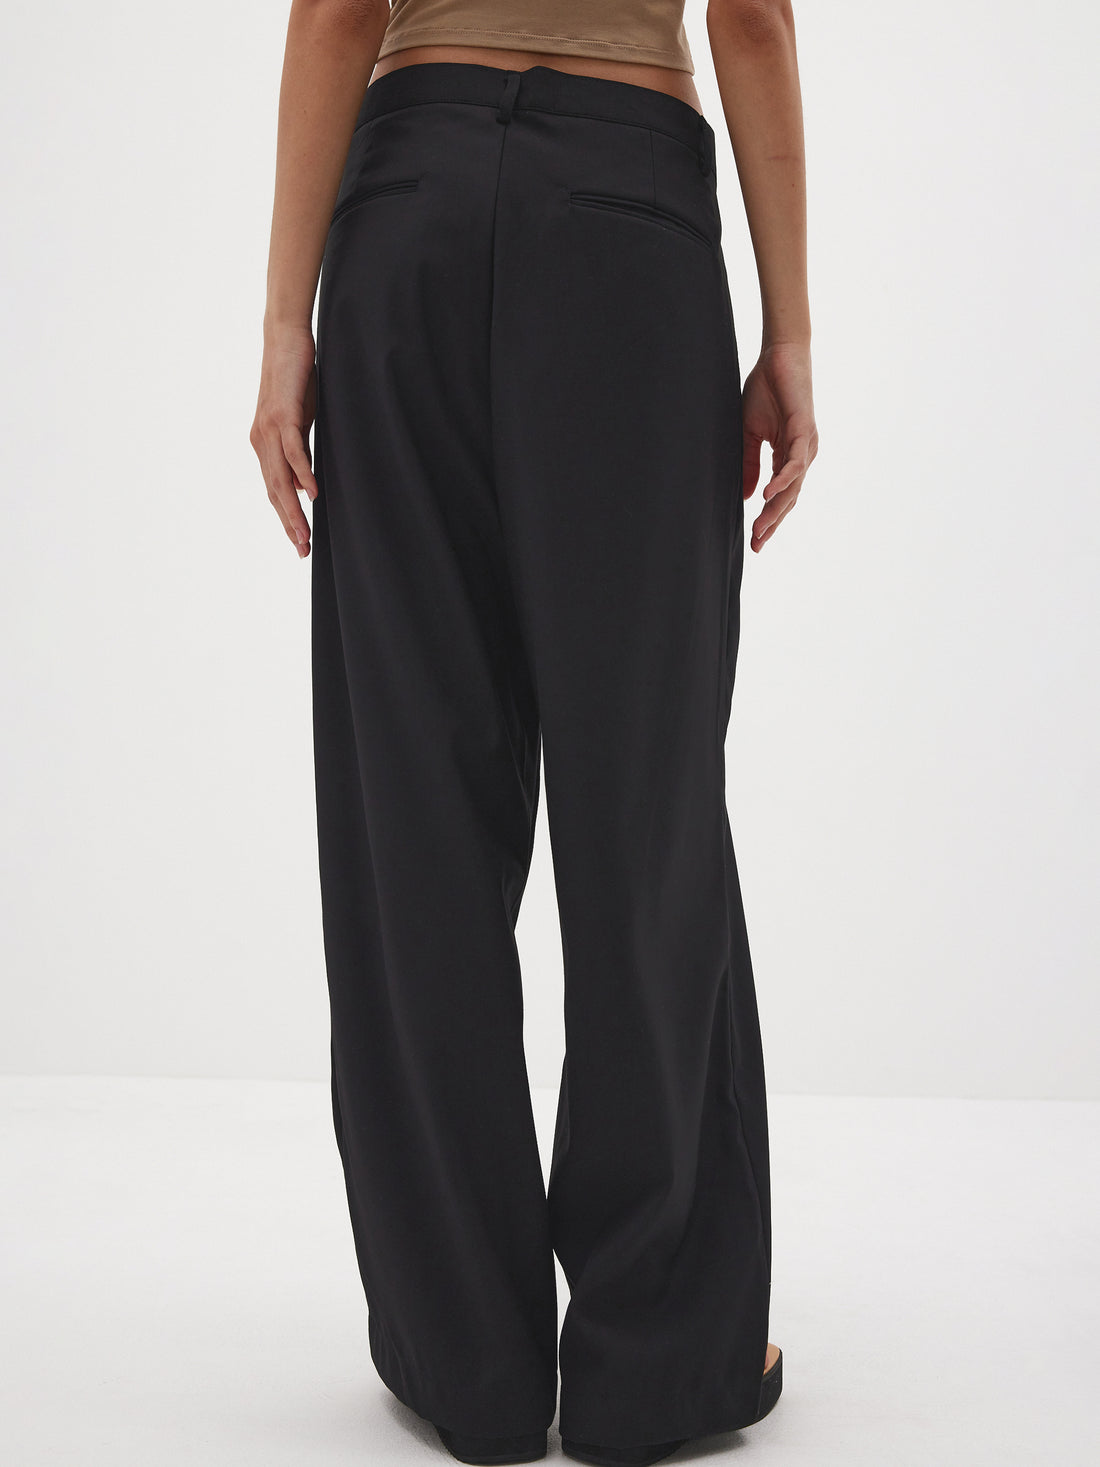 Low Rise Criss Cross Suit Trousers, Black – SourceUnknown